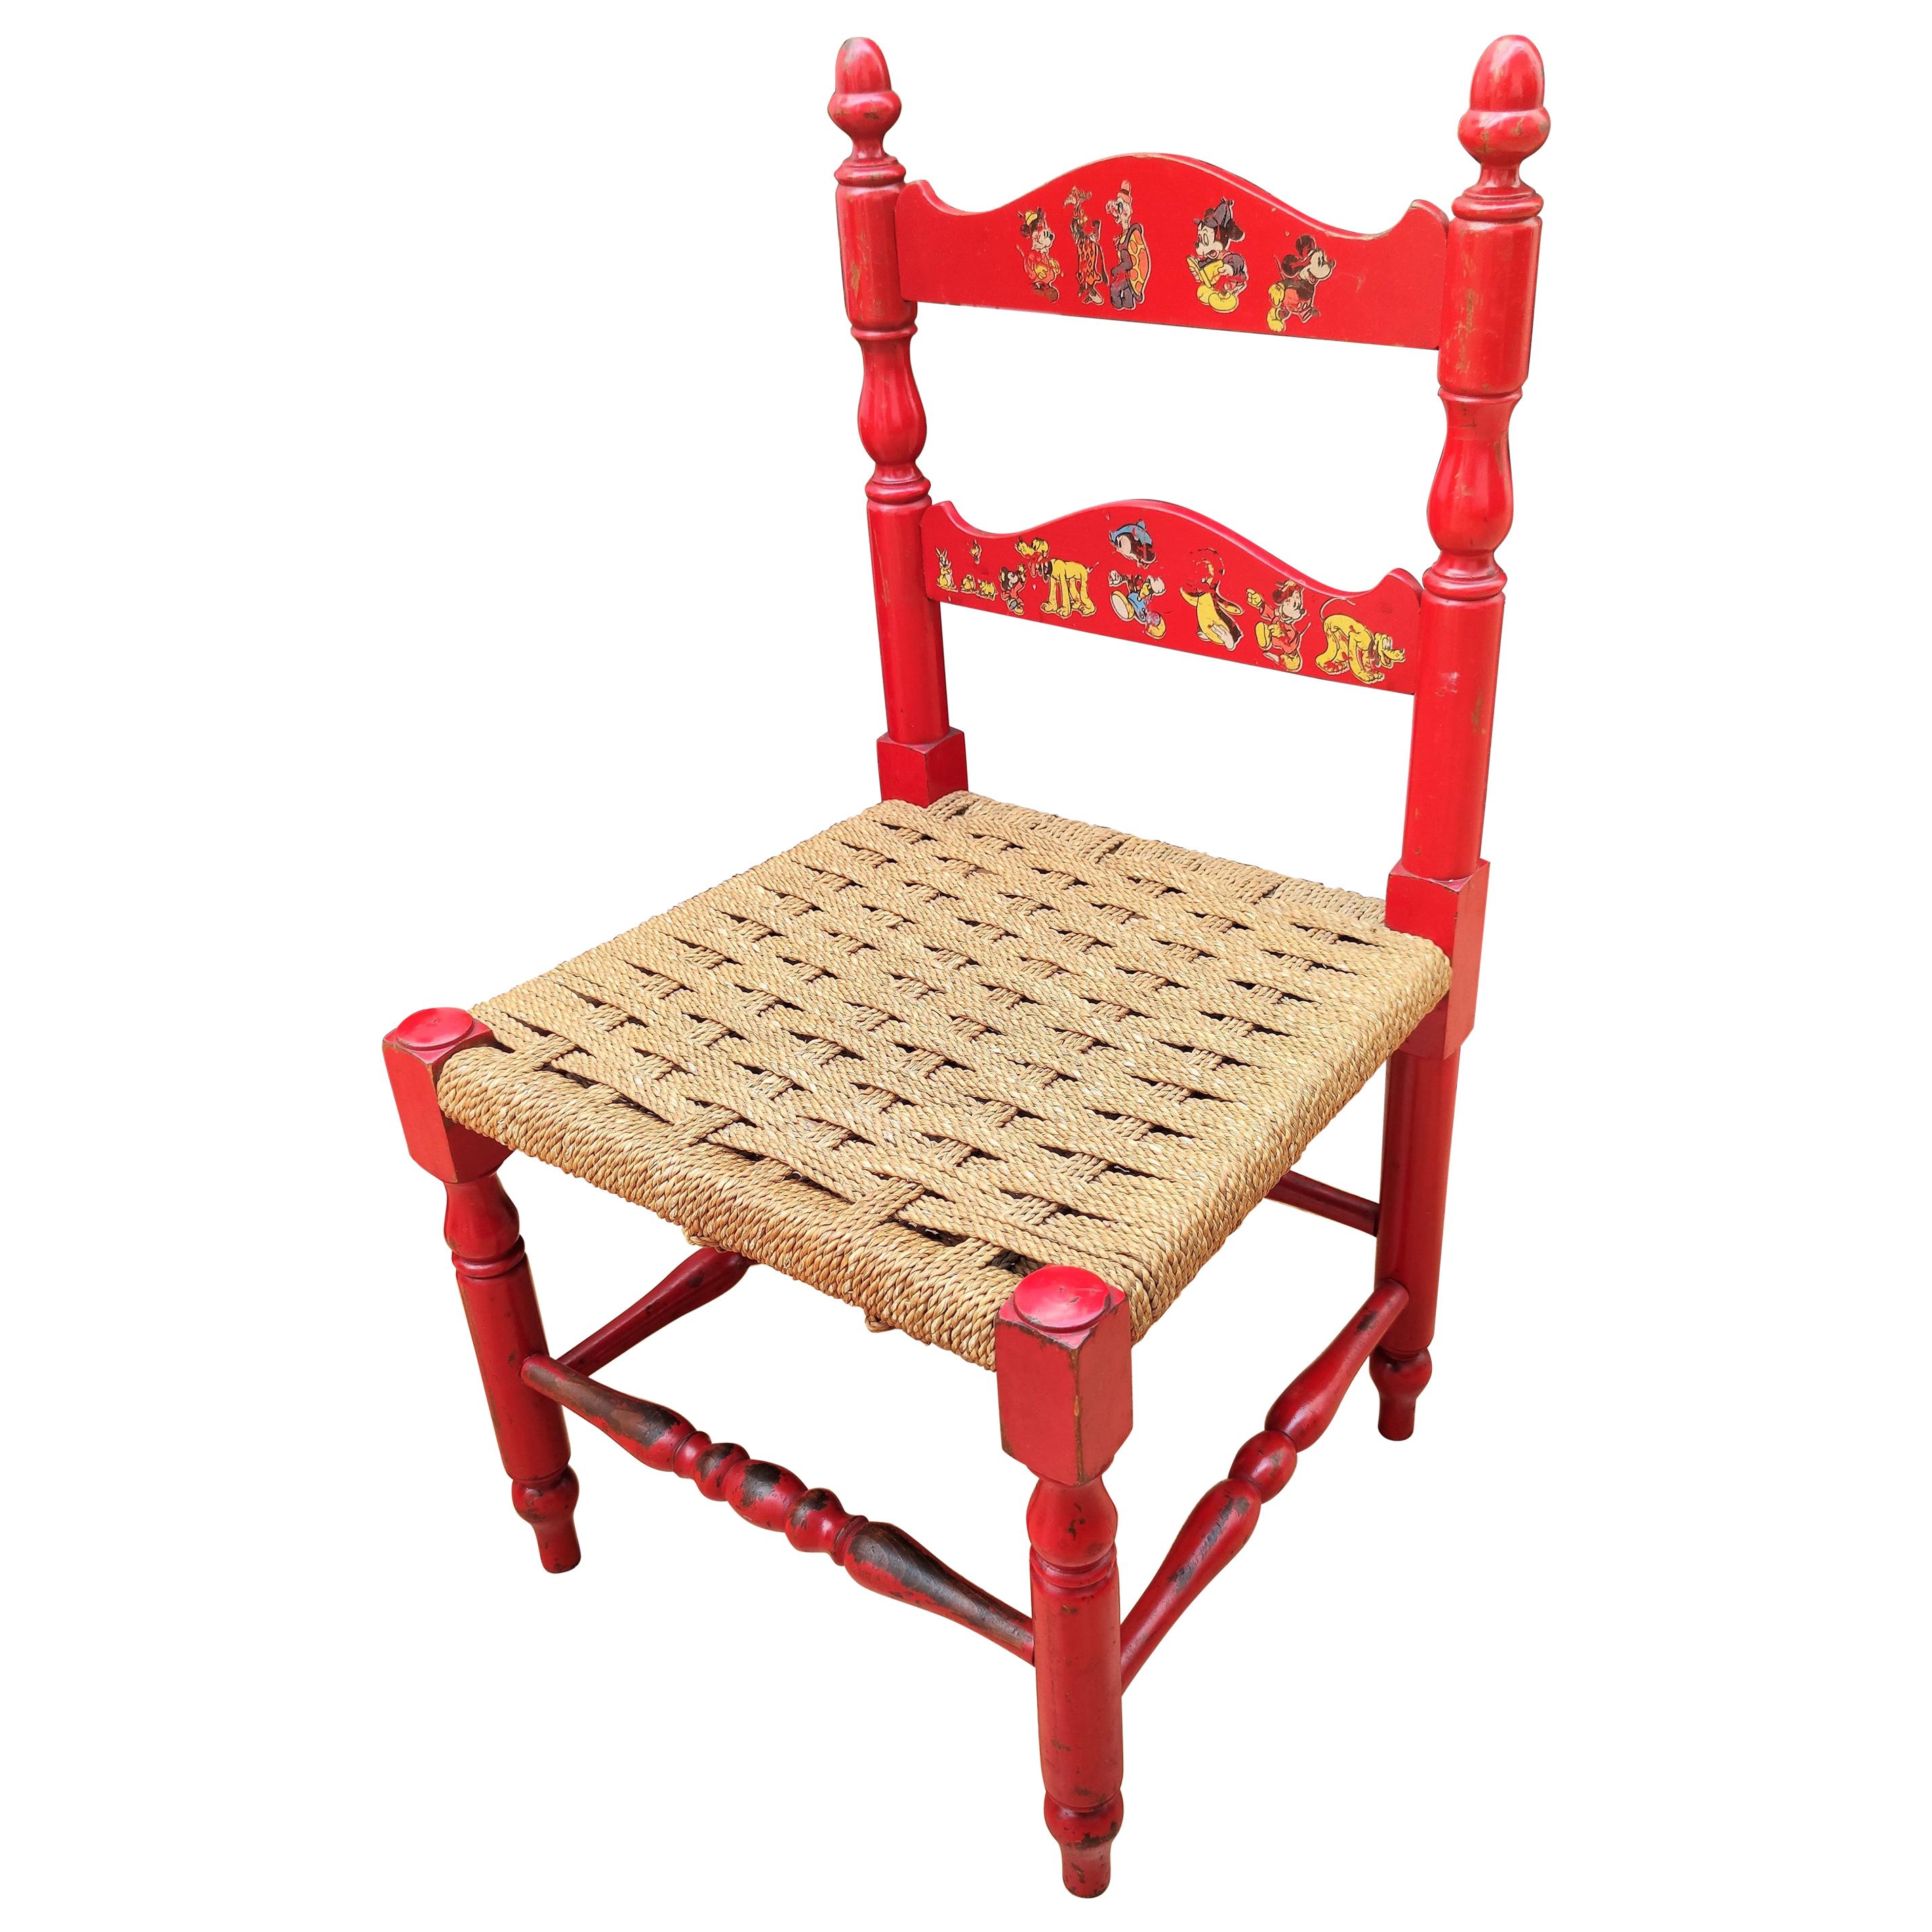 Italian Red Wood and Rope Rush Kids Children Chair with Disney Graphics